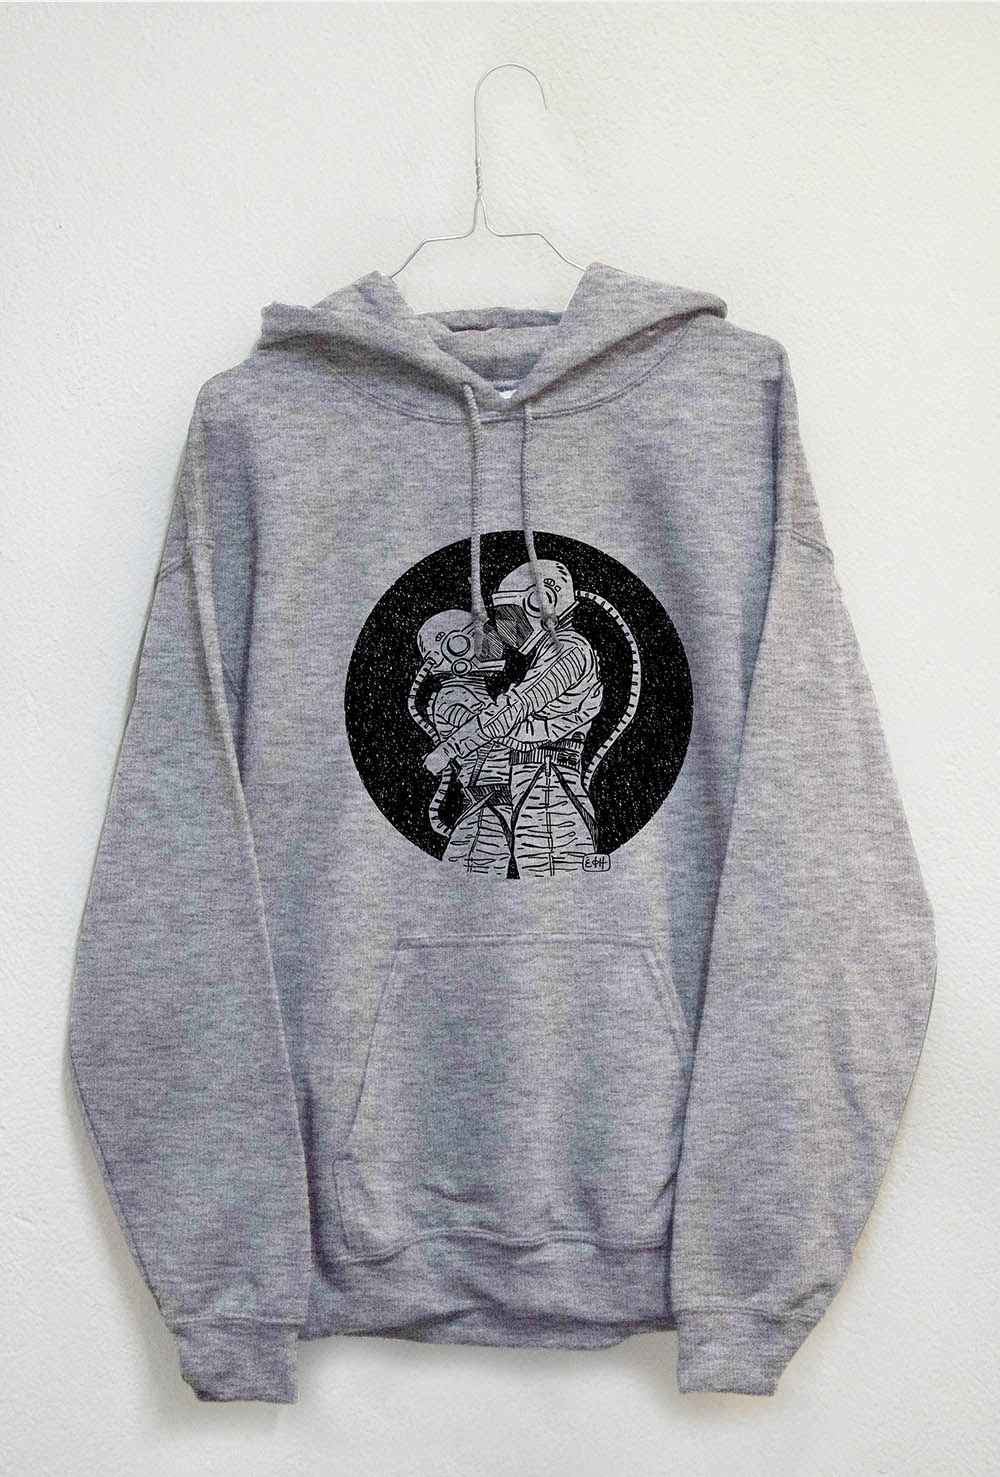 Subworks:Grey Hoodie with astronauts